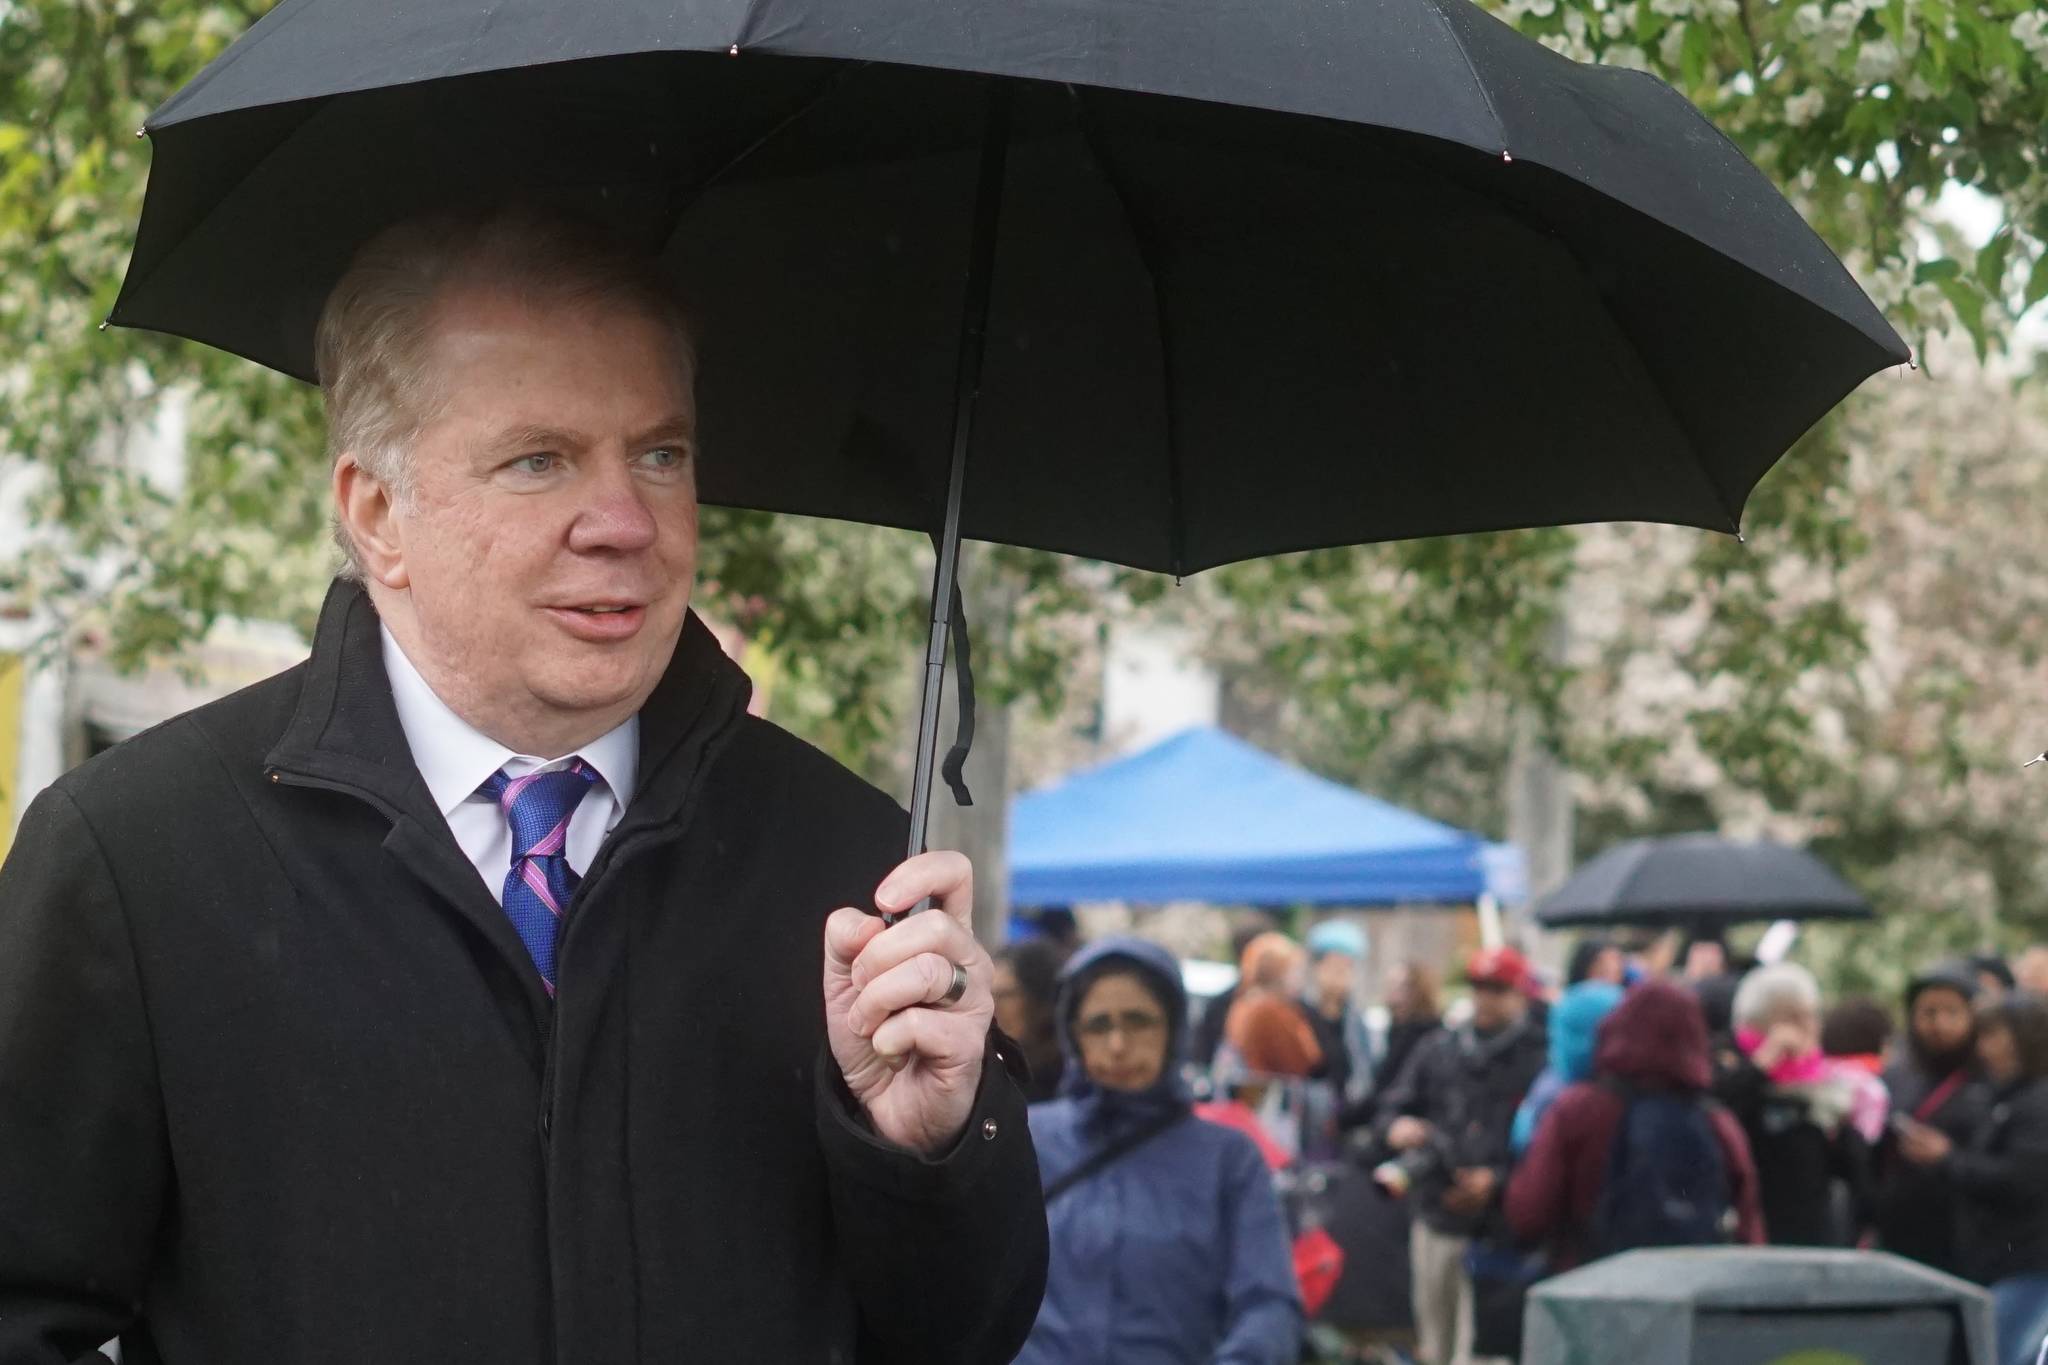 Mayor Ed Murray says his accusers’ background is fair game. Others aren’t so sure. Photo by Agatha Pacheco